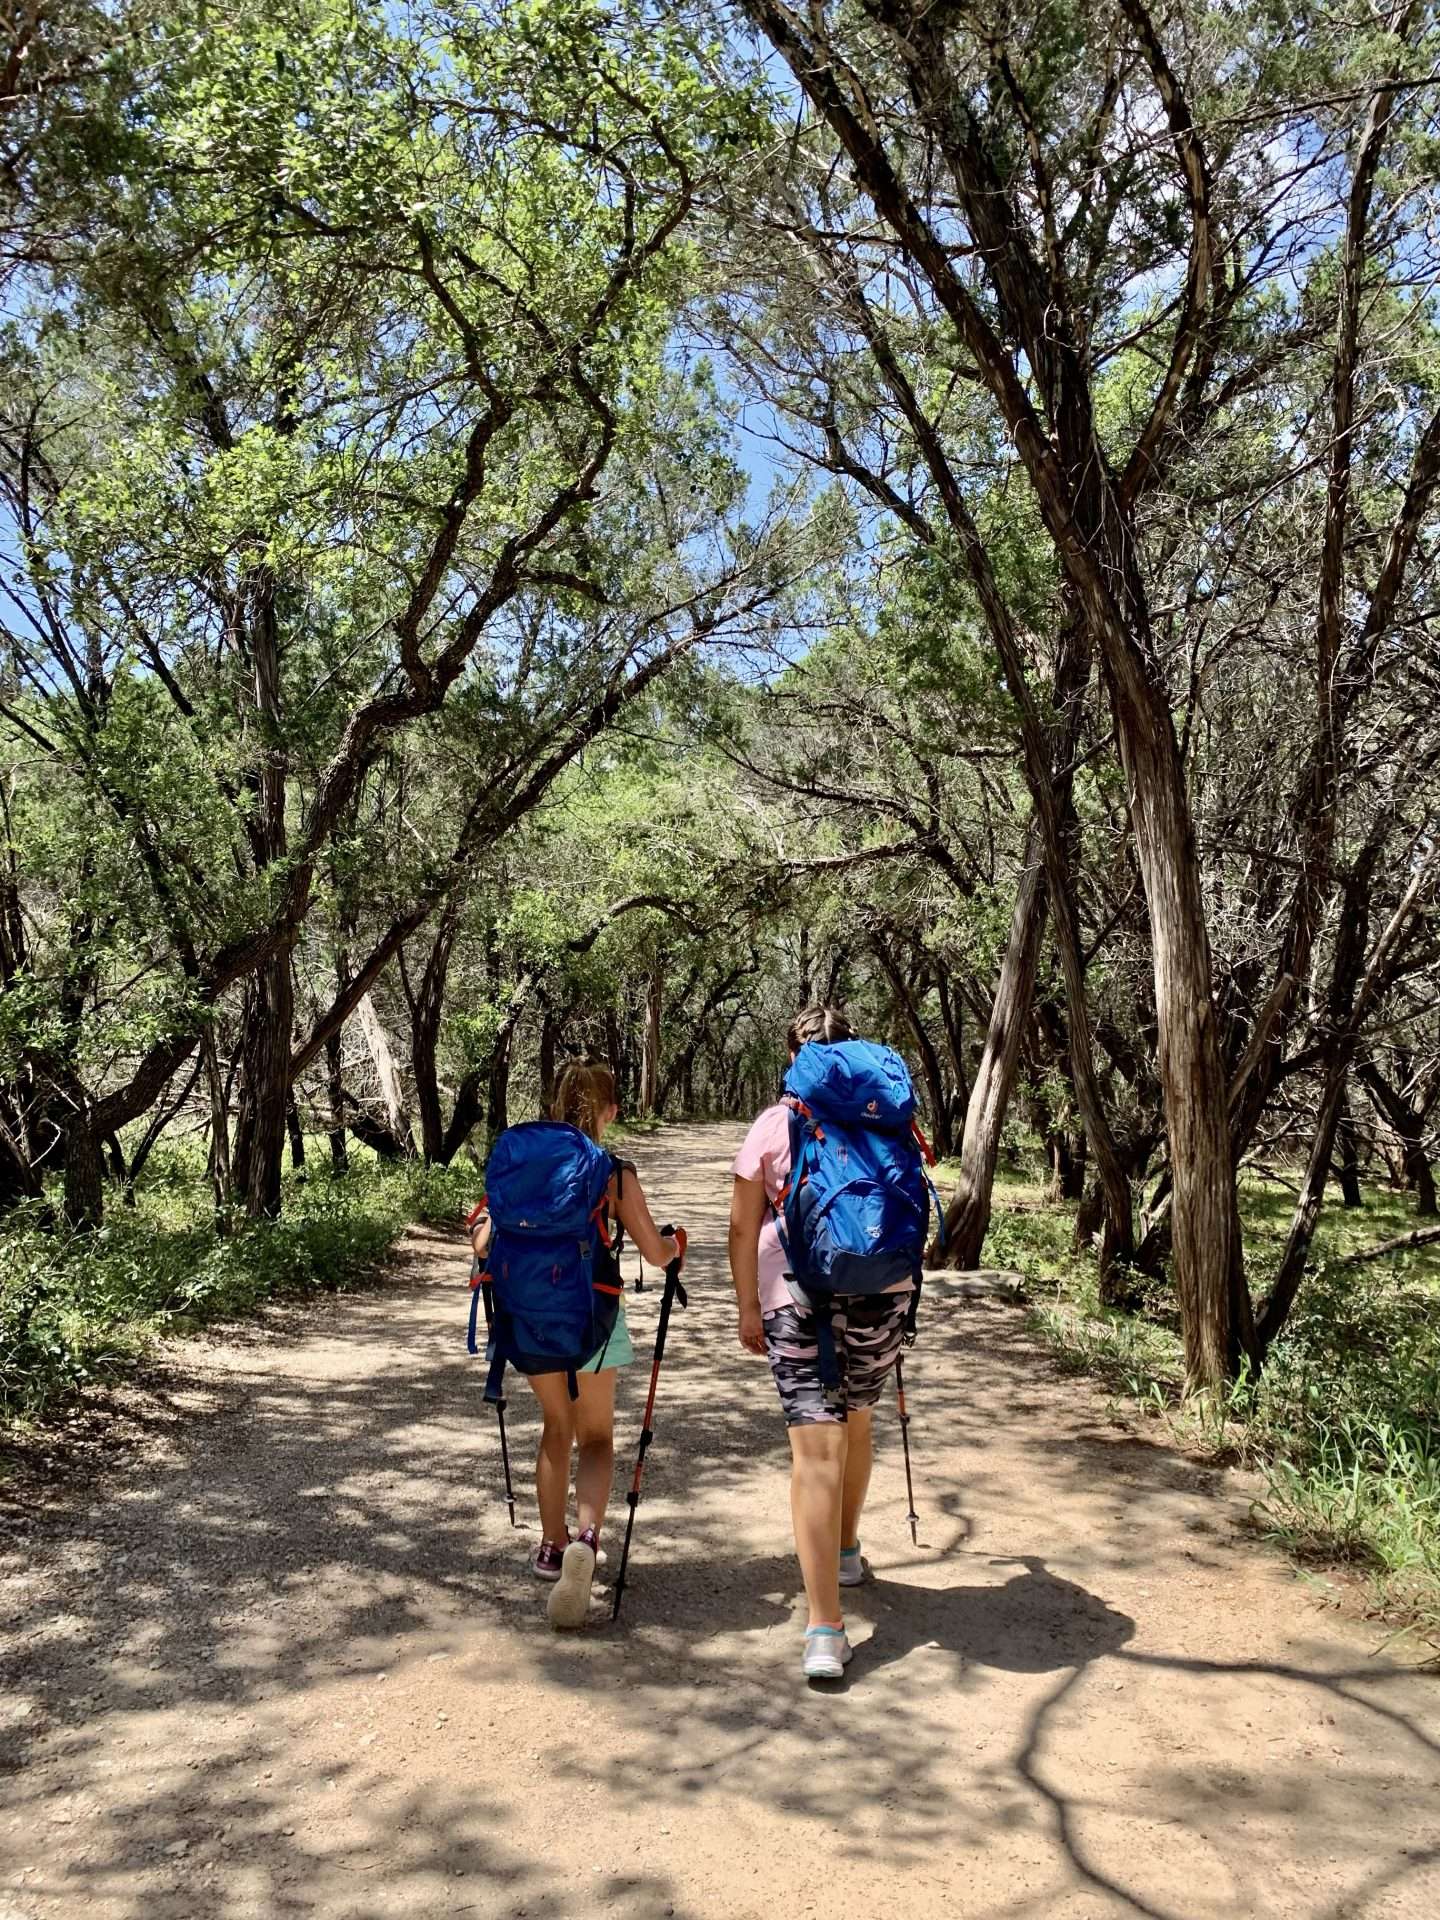 The beginning of our hike to Pedernales Falls.